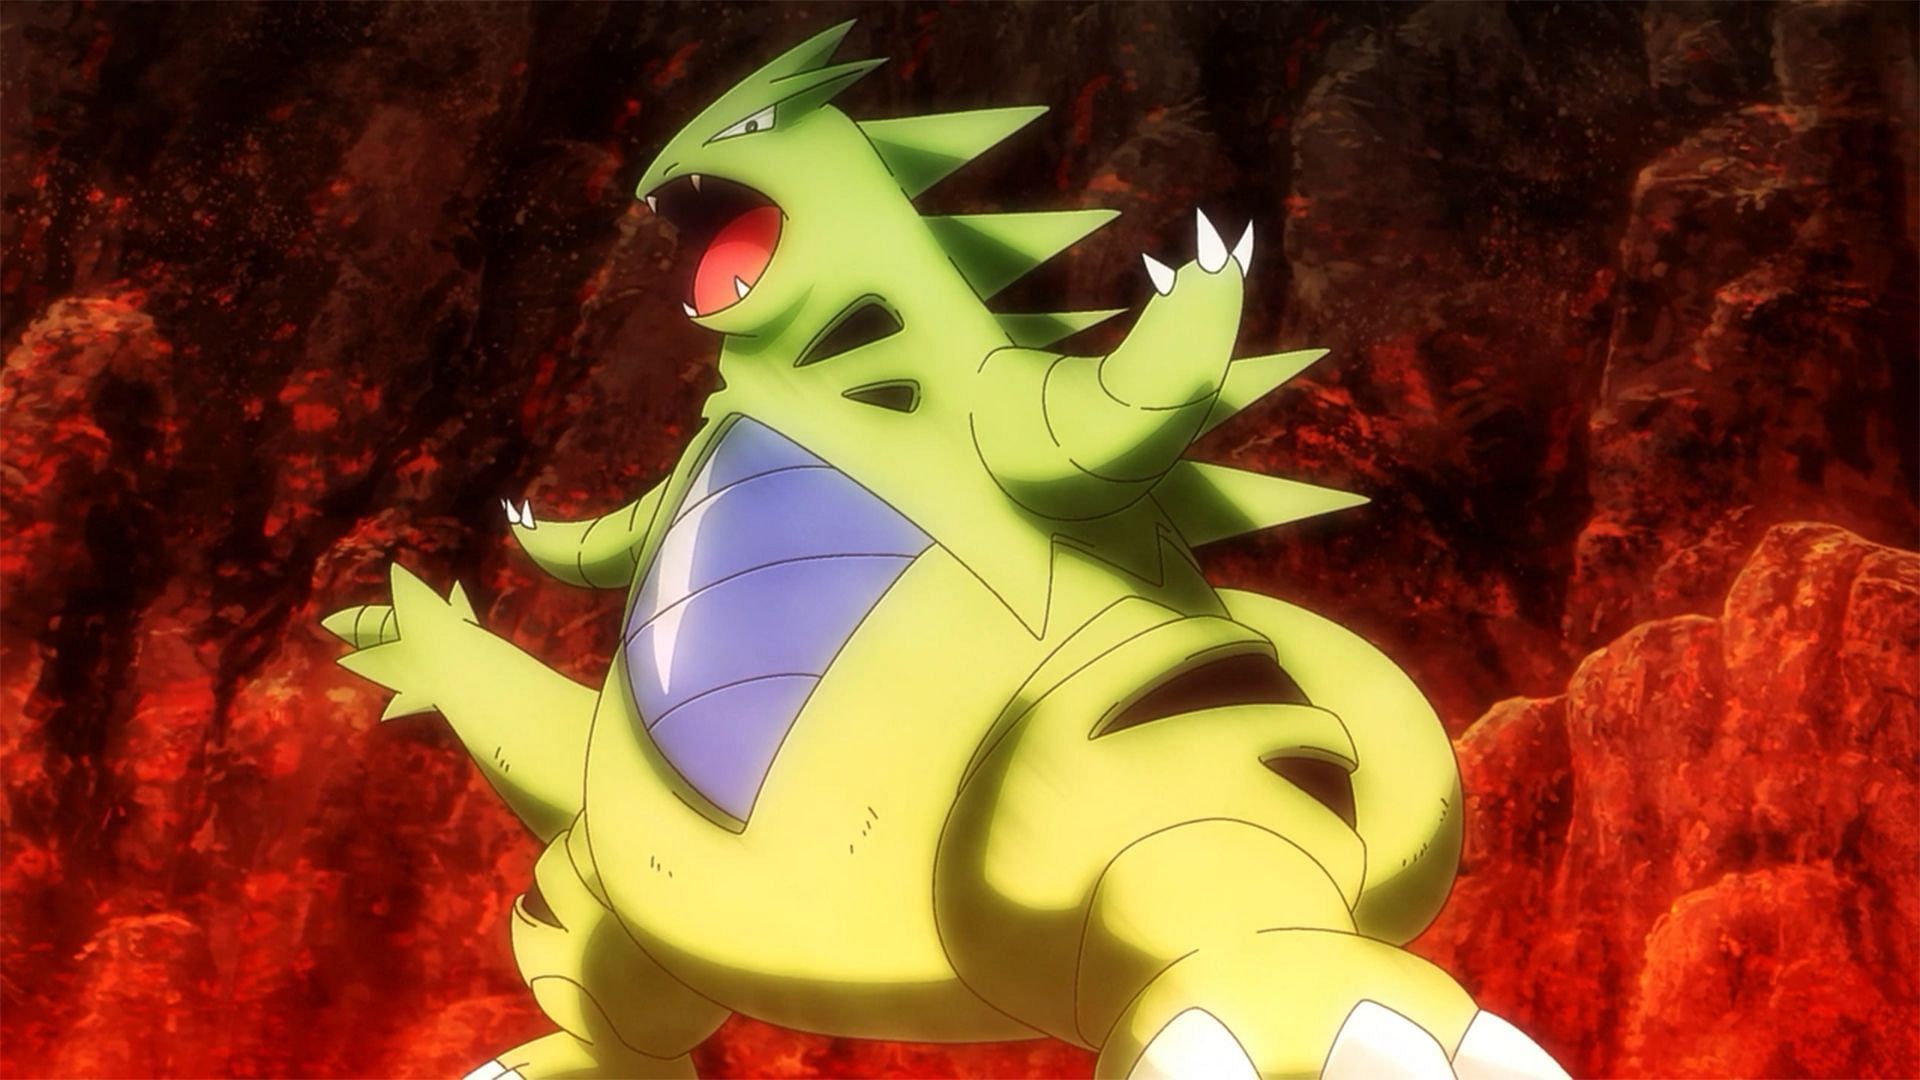 Tyranitar as it appears in the anime (Image via The Pokemon Company)